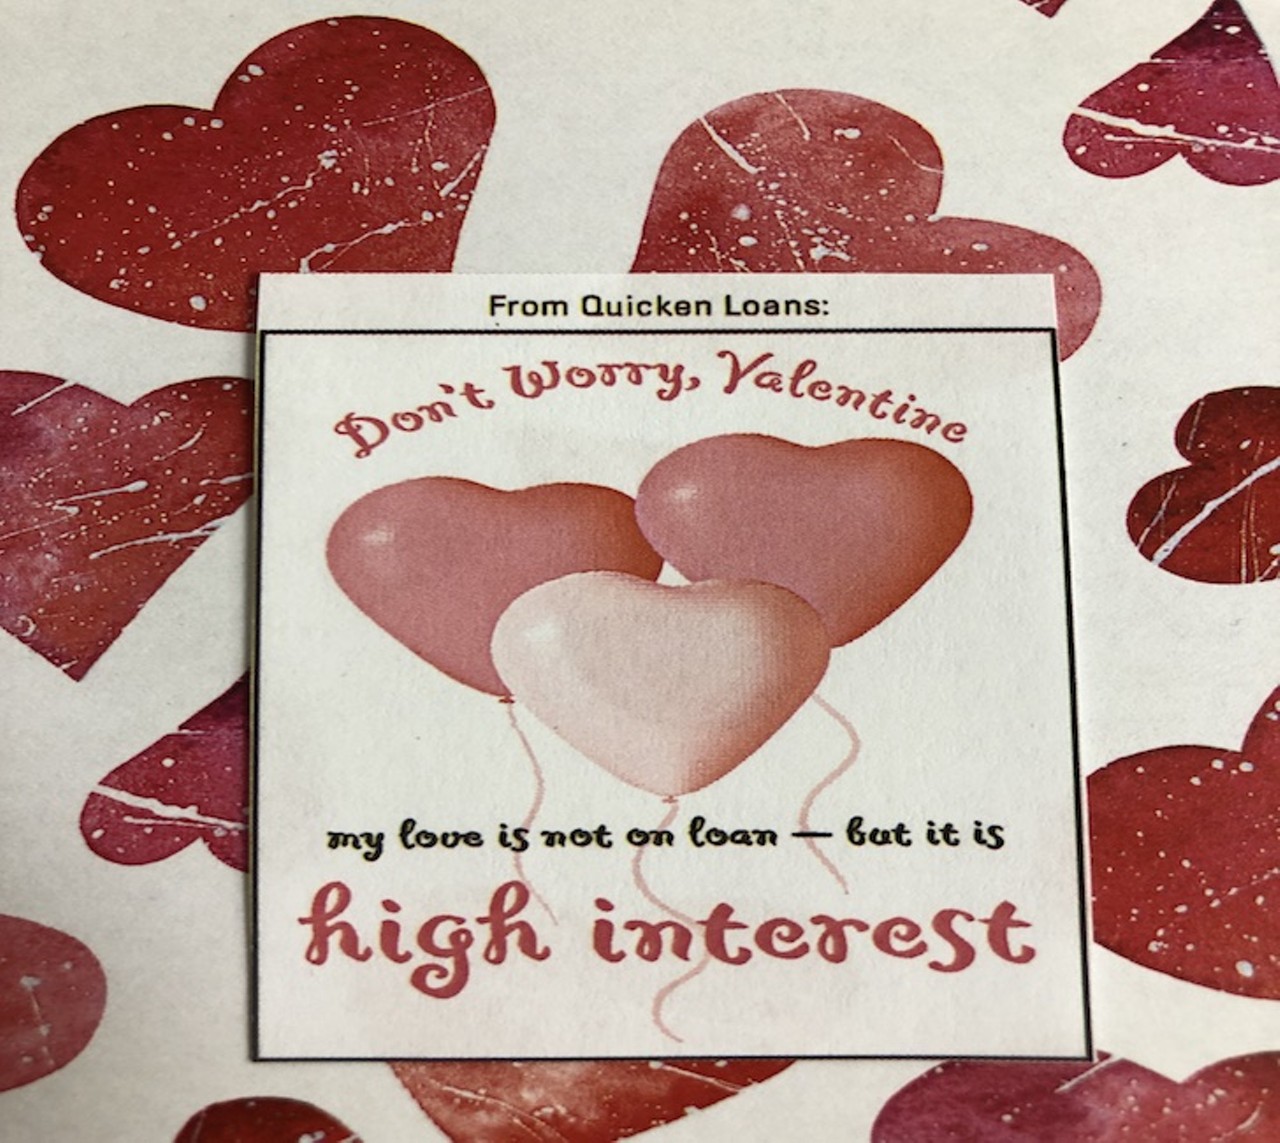 From Quicken Loans:
Don't worry, Valentine, my love is not on loan &#150; but it is high interest.